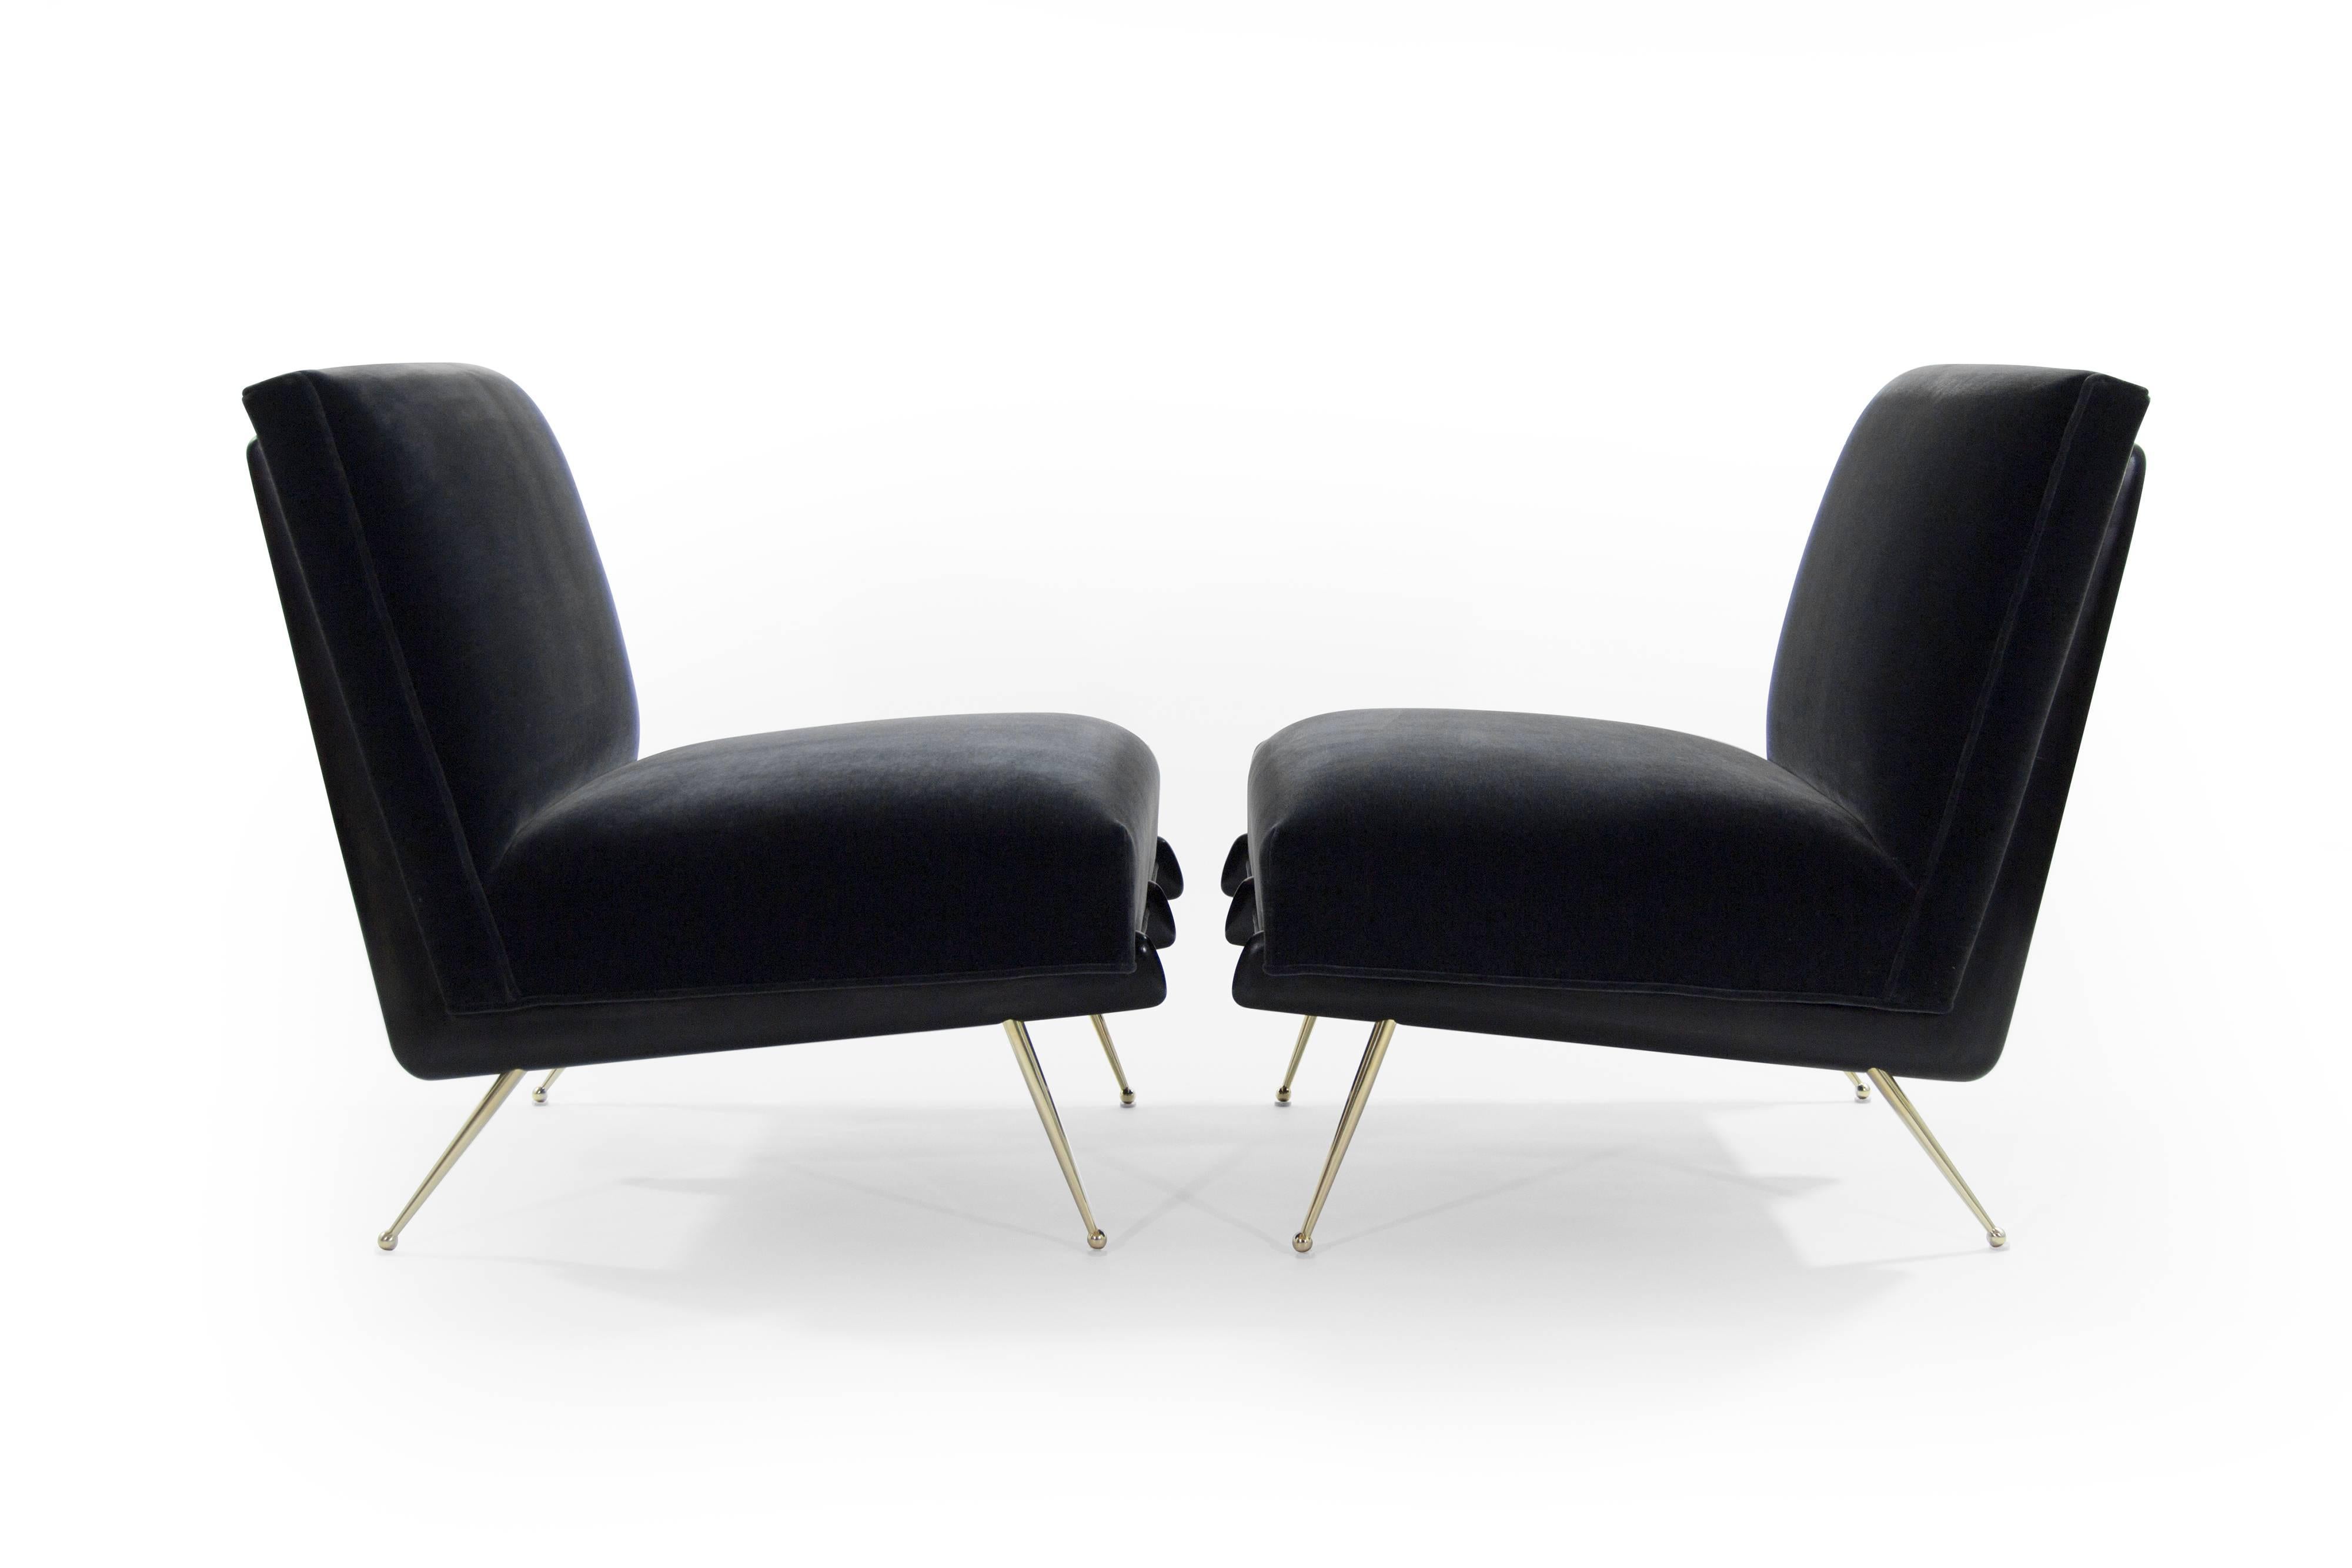 A phenomenal pair of lounge chairs in the style of Italian designer Gio Ponti, circa 1950s.

Boomerang shaped walnut frames fully restored to their original ebonized finish, newly upholstered in charcoal mohair. Thin tapered brass legs newly